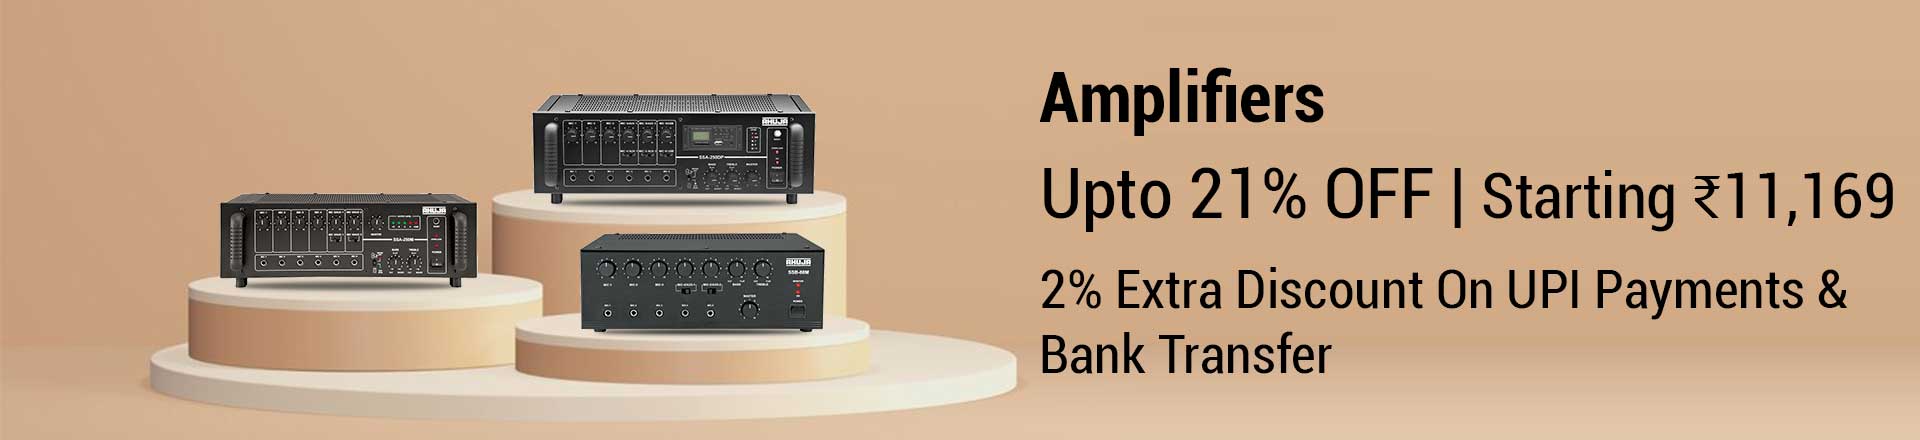 Amplifiers-Categorypage-14-08-23